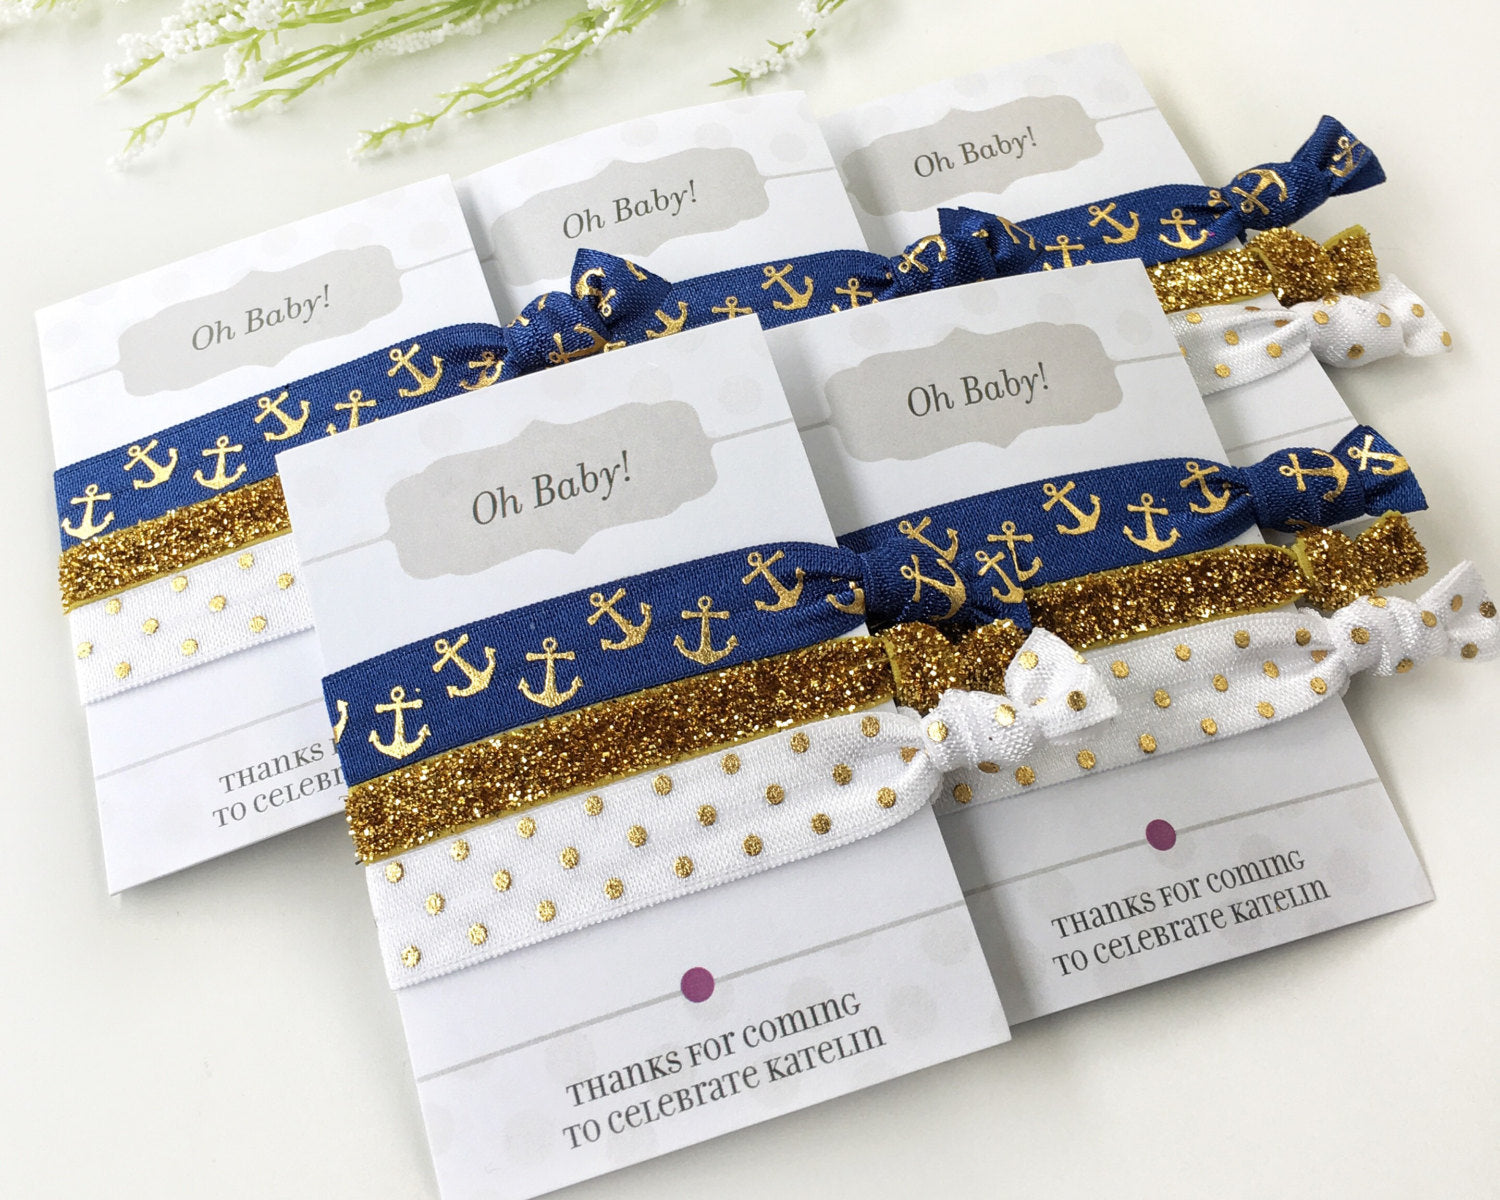 Nautical Baby Shower Favors Girl - Nautical Party Supplies - Anchor Party Decorations - Navy Party Decor - Hair Tie Favors Baby Shower - @PlumPolkaDot 